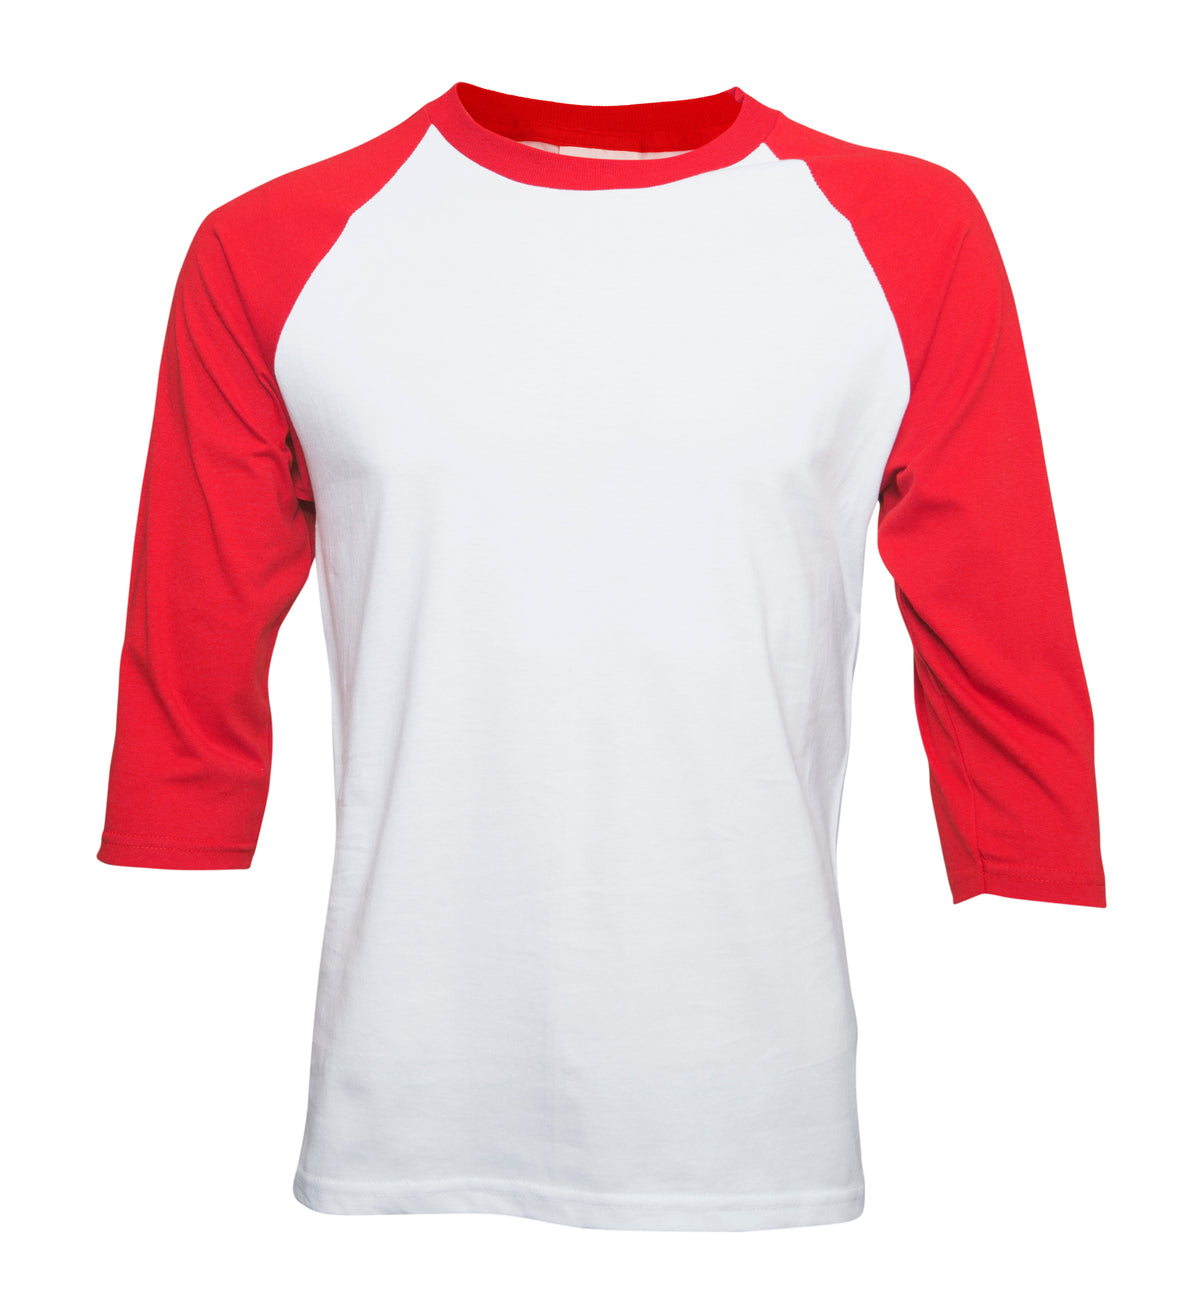 The 24 Premium Baseball Jersey in Red